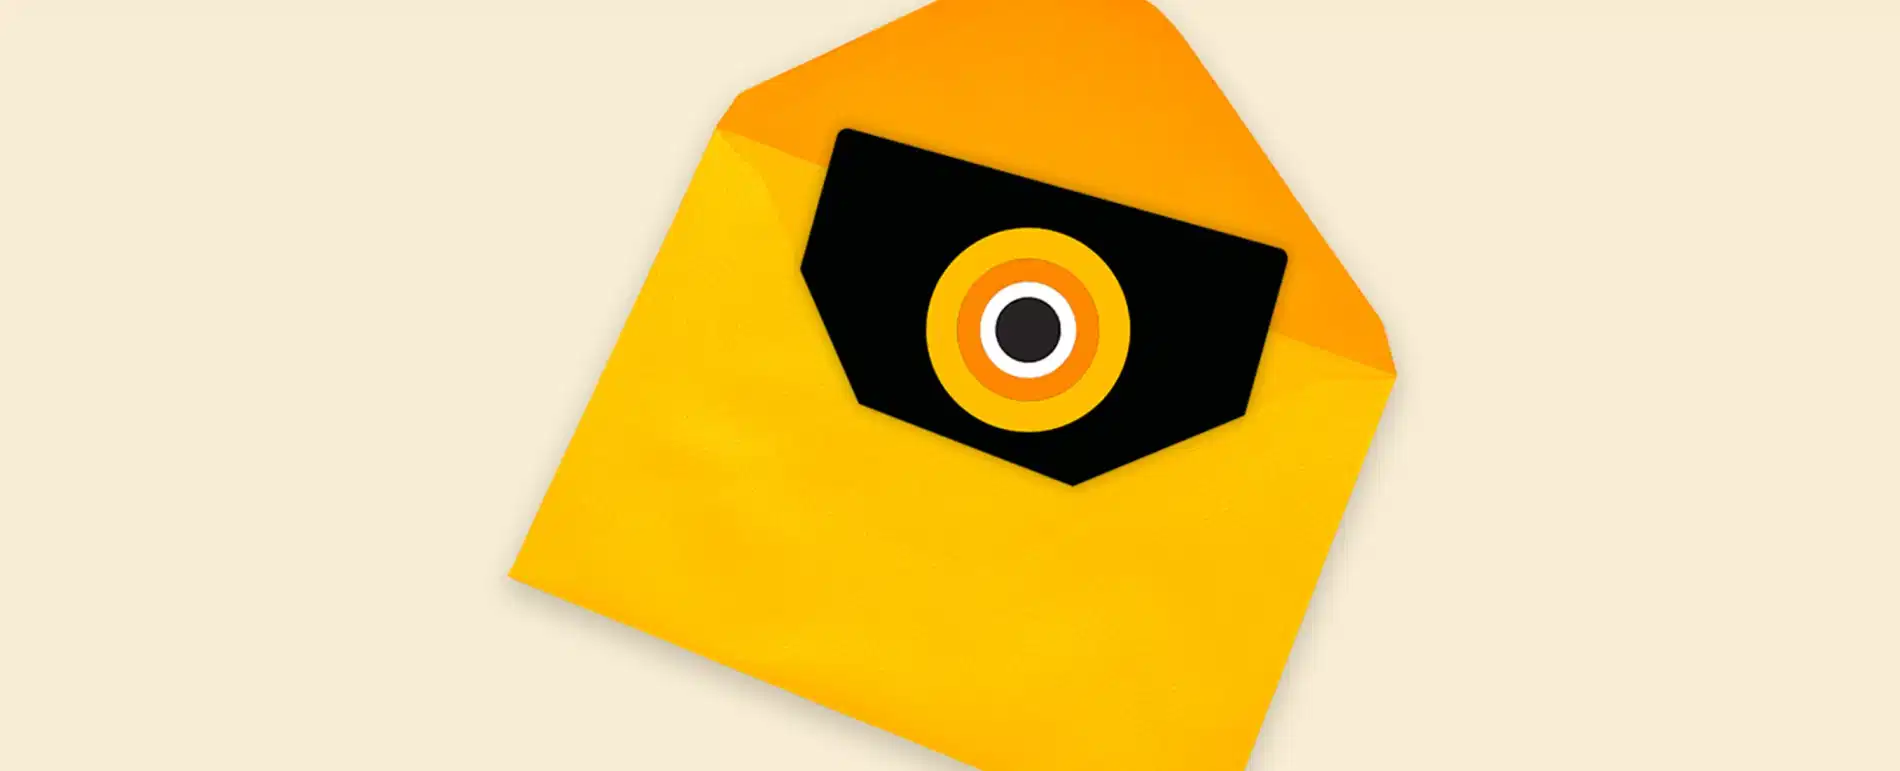 Graphic of a CorePower logo black gift card coming out of a yellow/orange envelope on a tan background